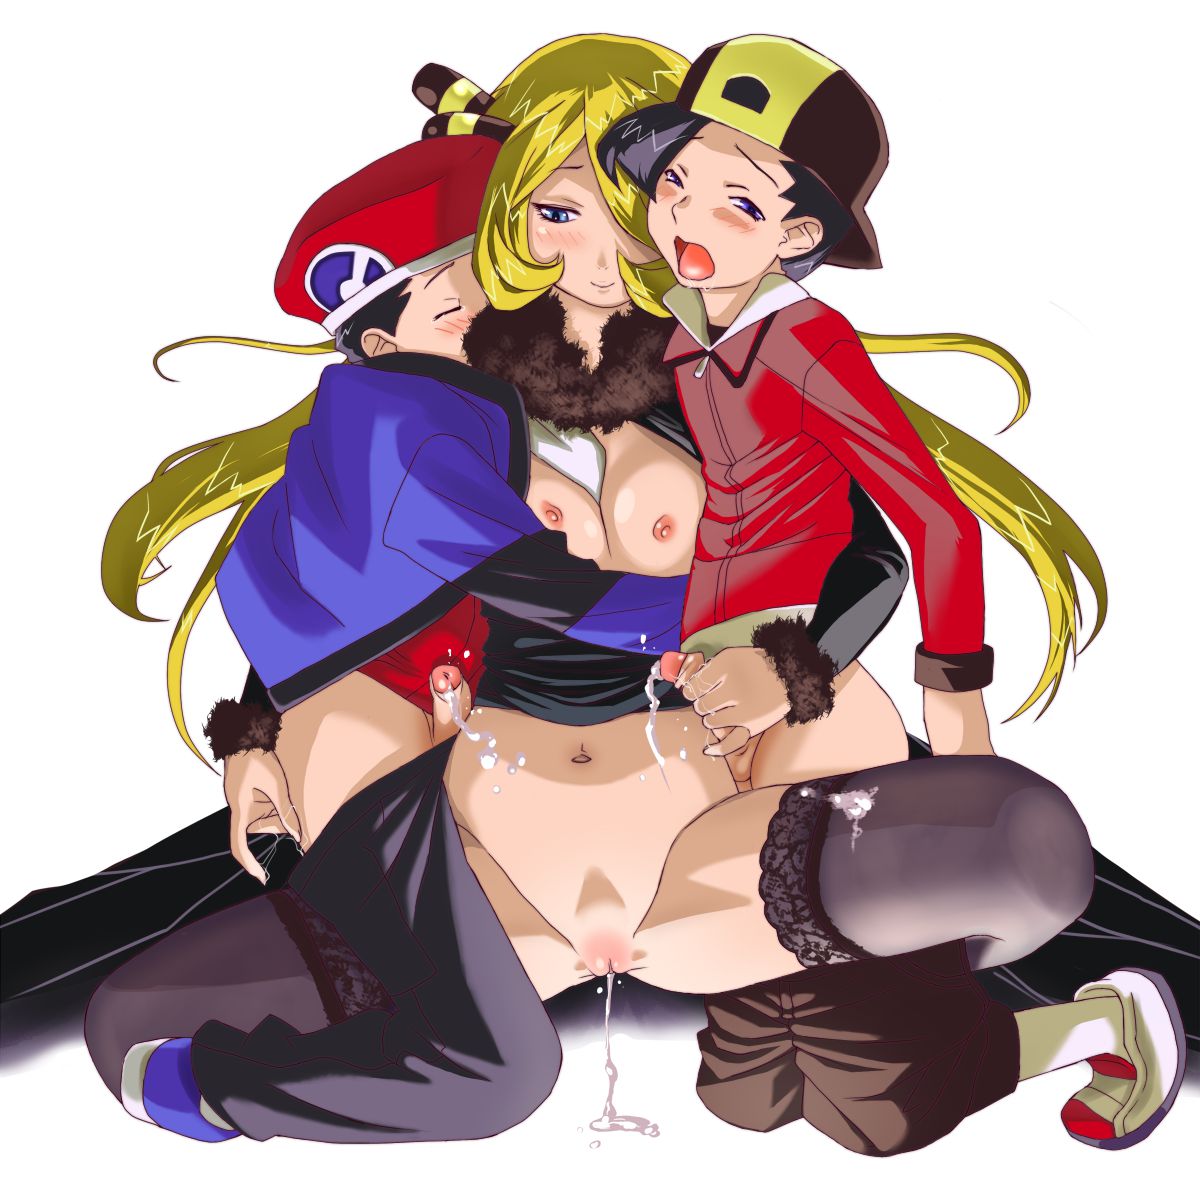 Erotic pictures of Pokemon (Pocket Monsters) team 1 35 1